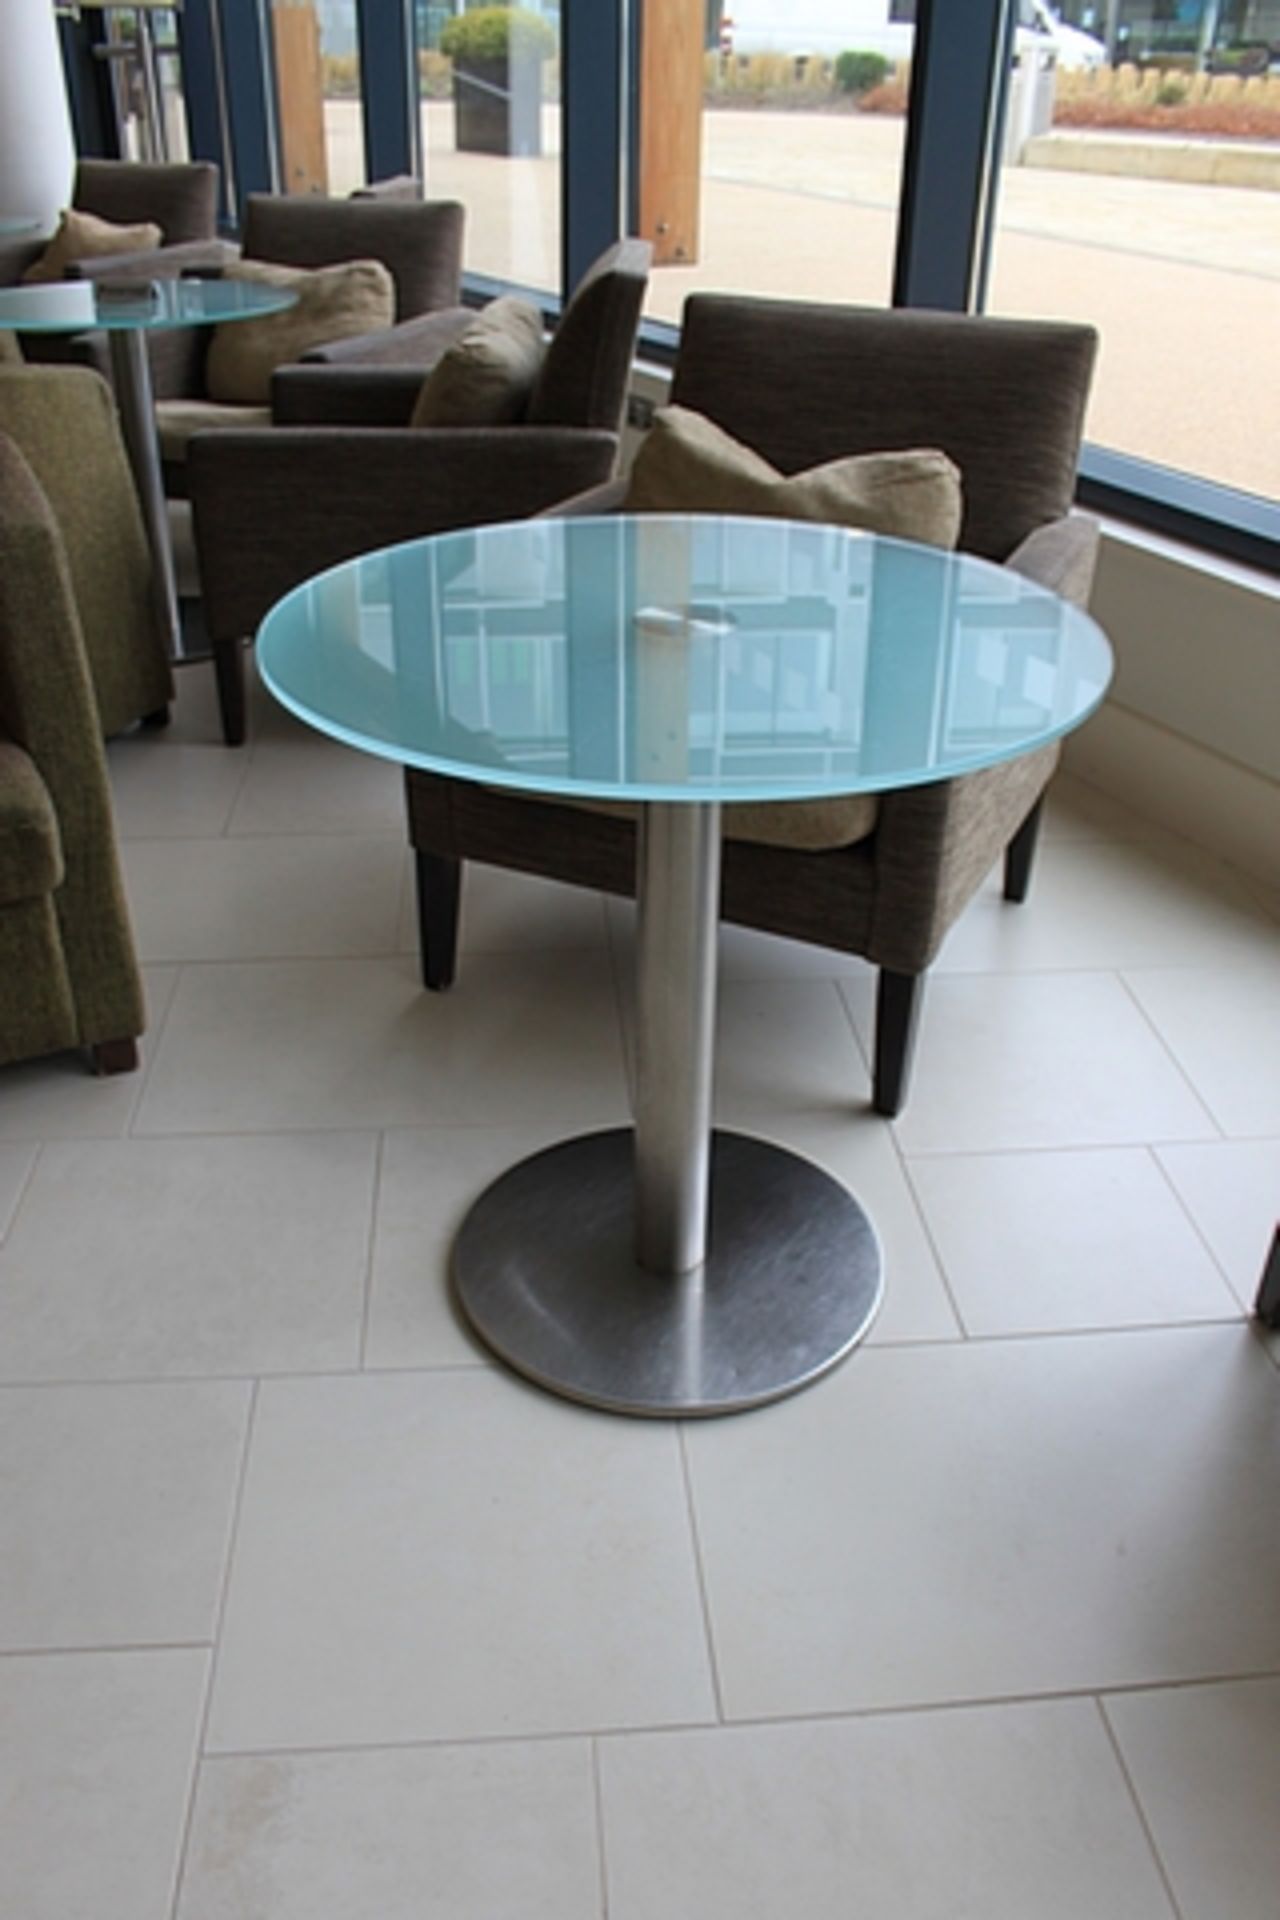 Kesterport Inox Round Circular Table Glass Top Brushed Stainless-Steel Pedestal & Base With 10mm - Image 3 of 3